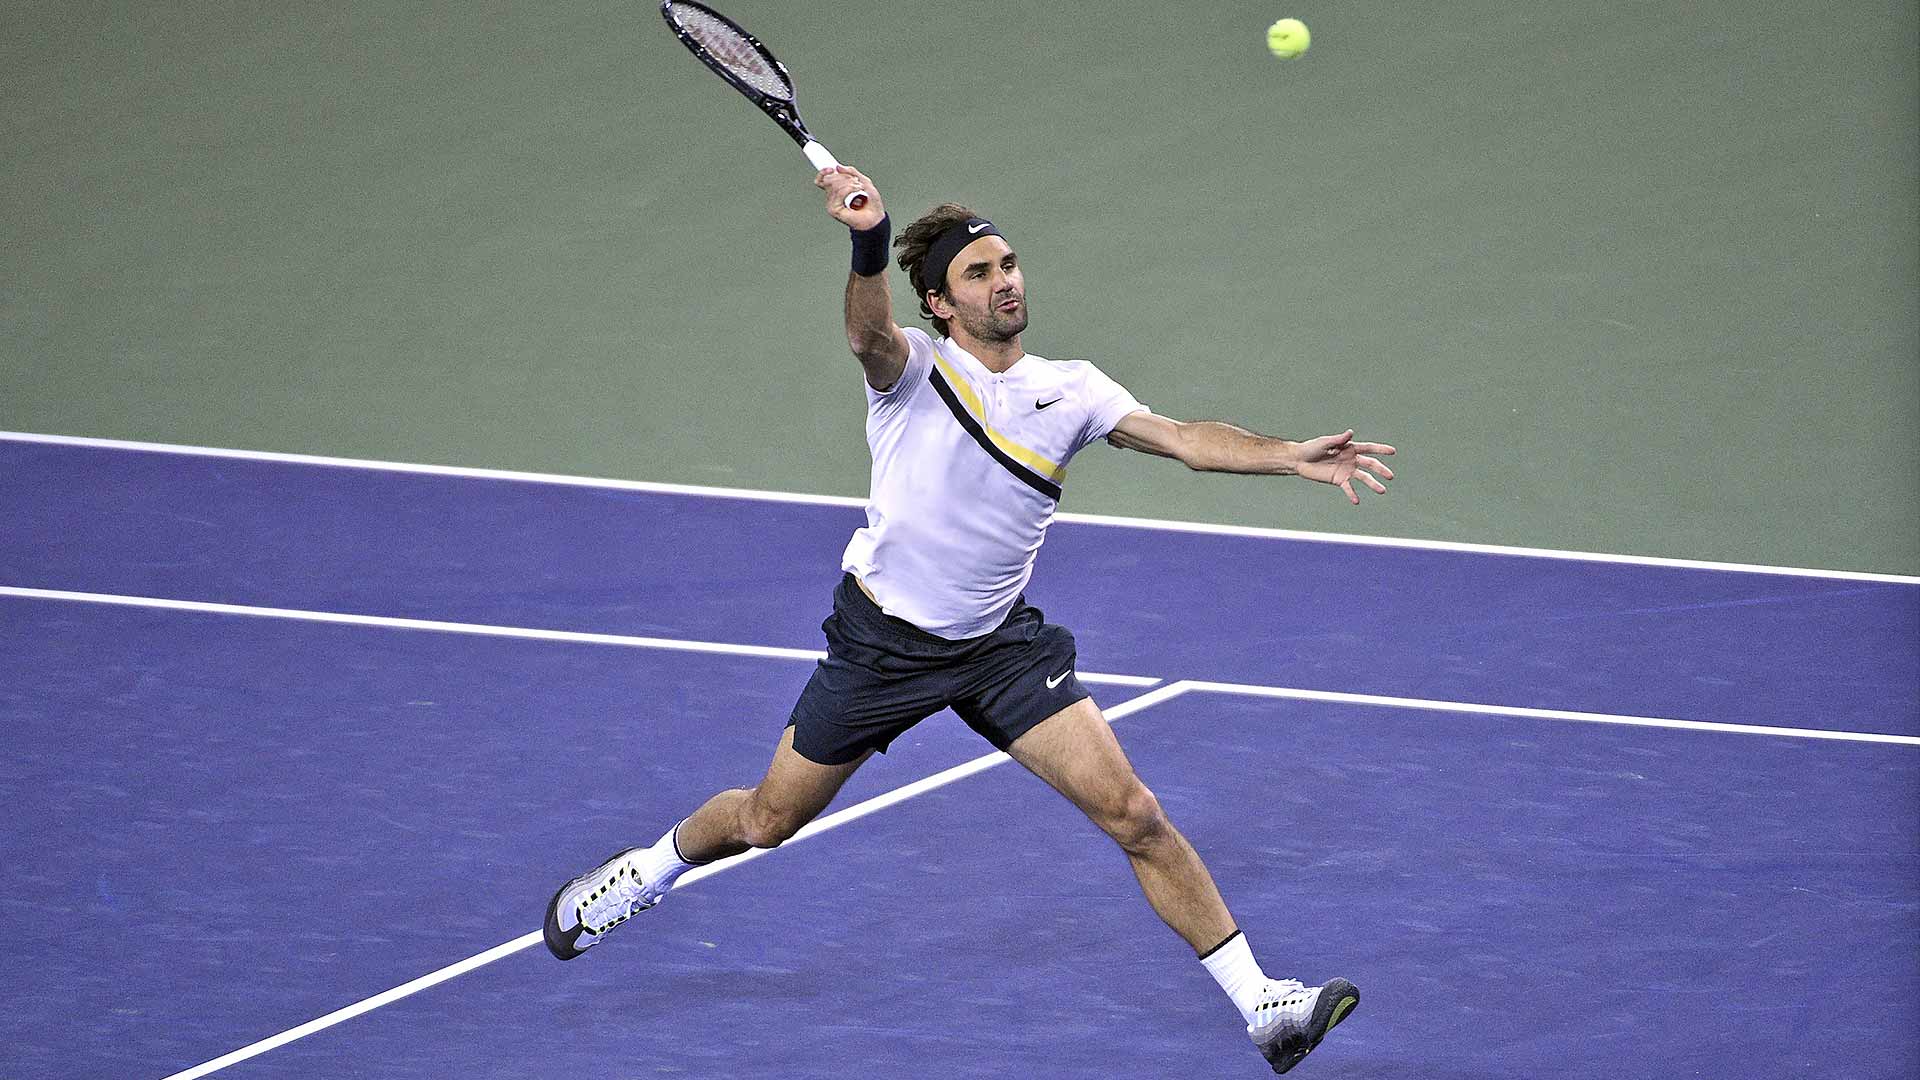 Roger Federer improves to 16-0 on the season, matching his career-best start to a year in 2006.